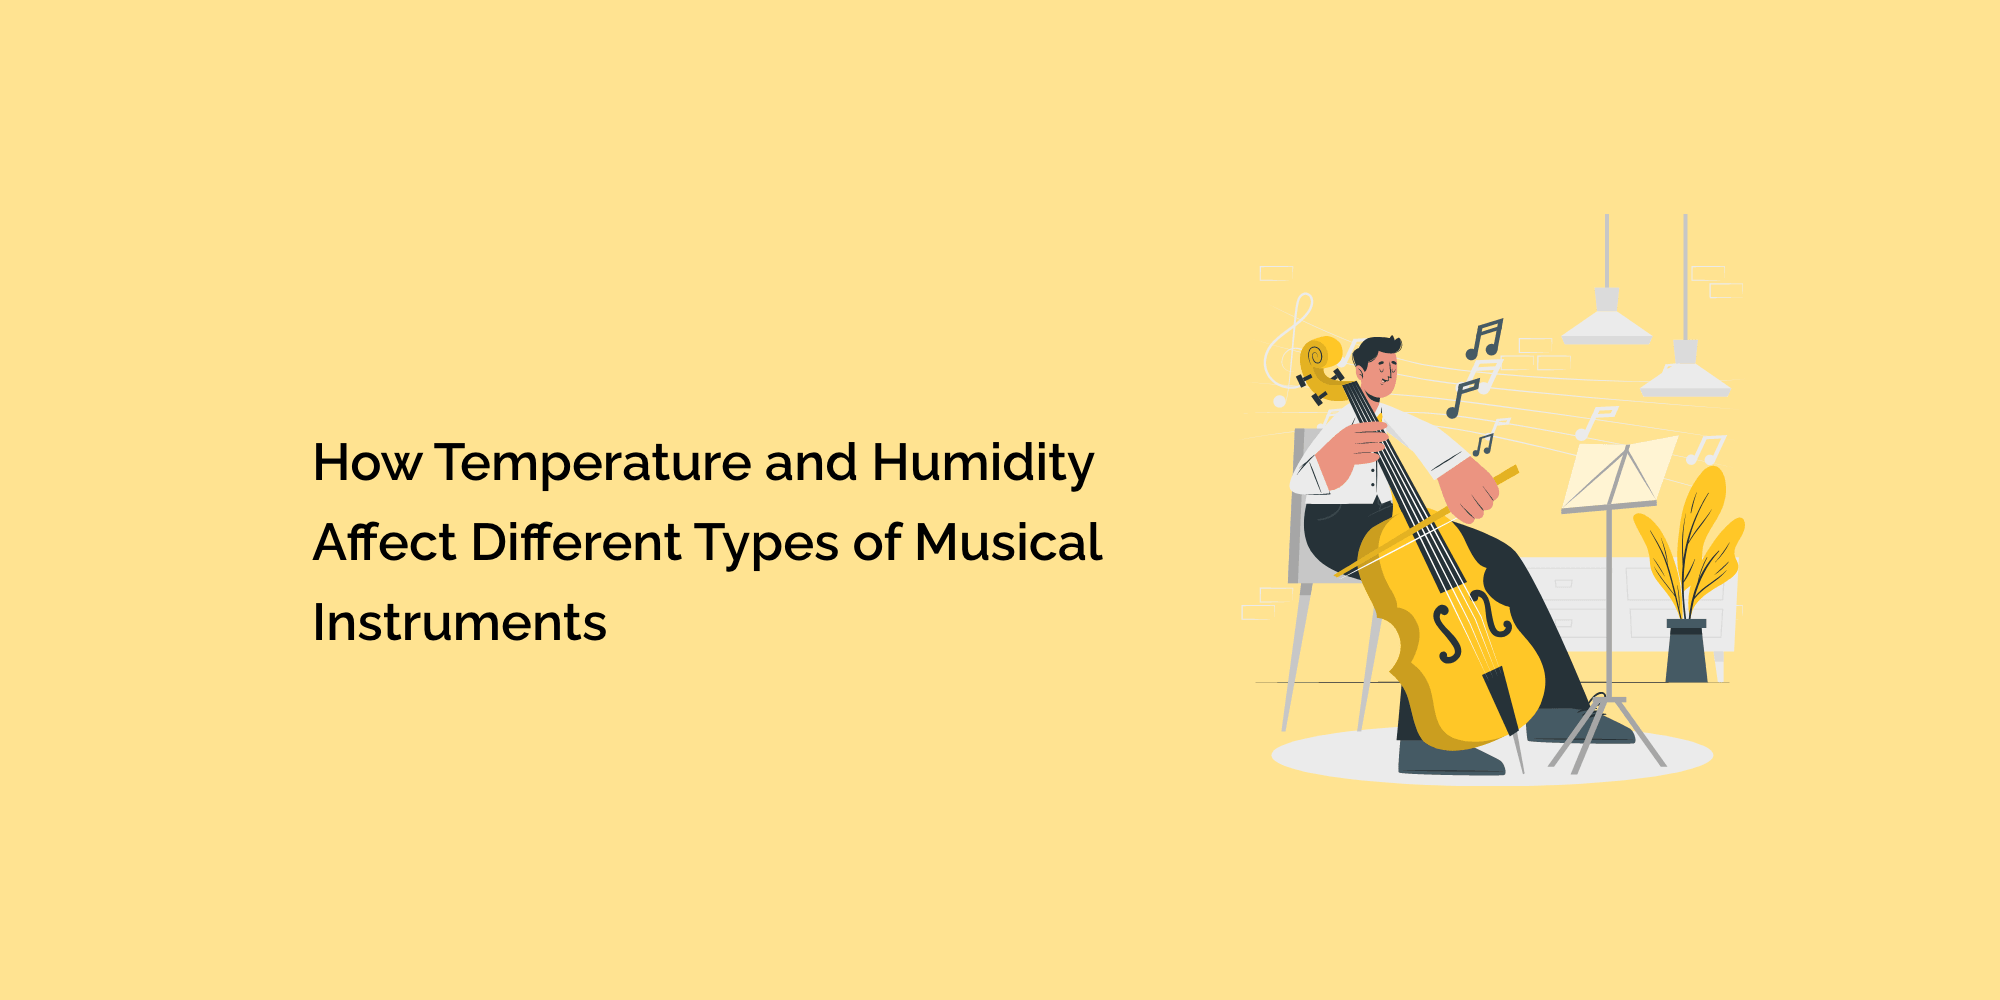 How Temperature and Humidity Affect Different Types of Musical Instruments